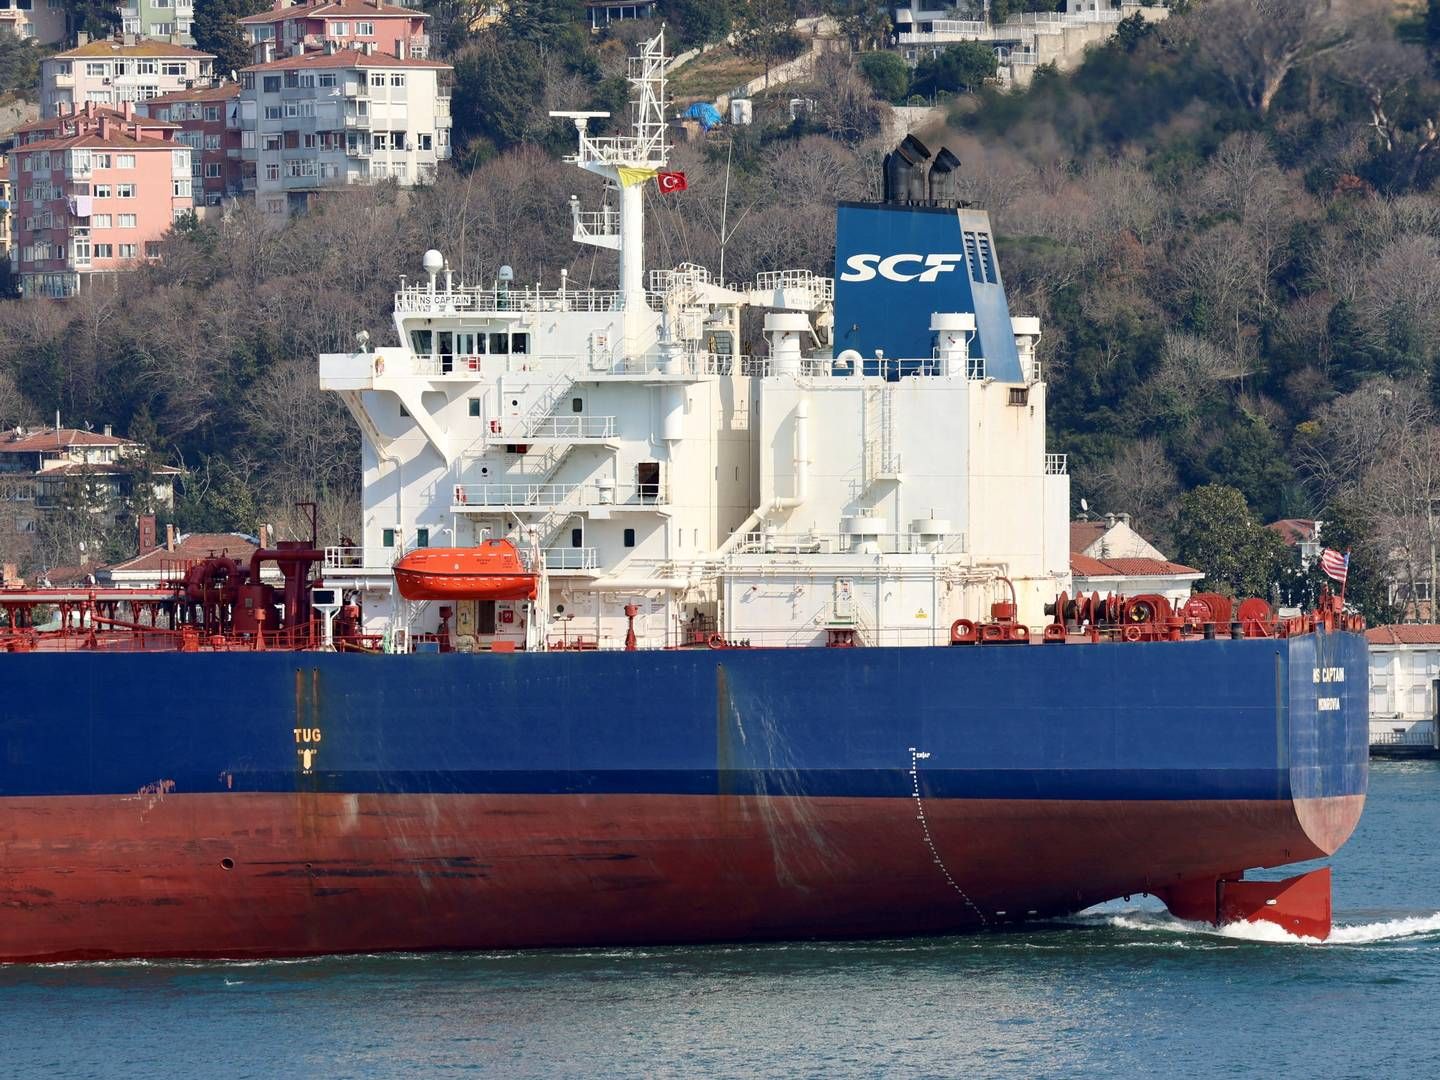 Archive photo. The Liberian-flagged tanker NS Captain owned by Russia's state-run shipping company Sovcomflot. | Foto: Yoruk Isik/Reuters/Ritzau Scanpix